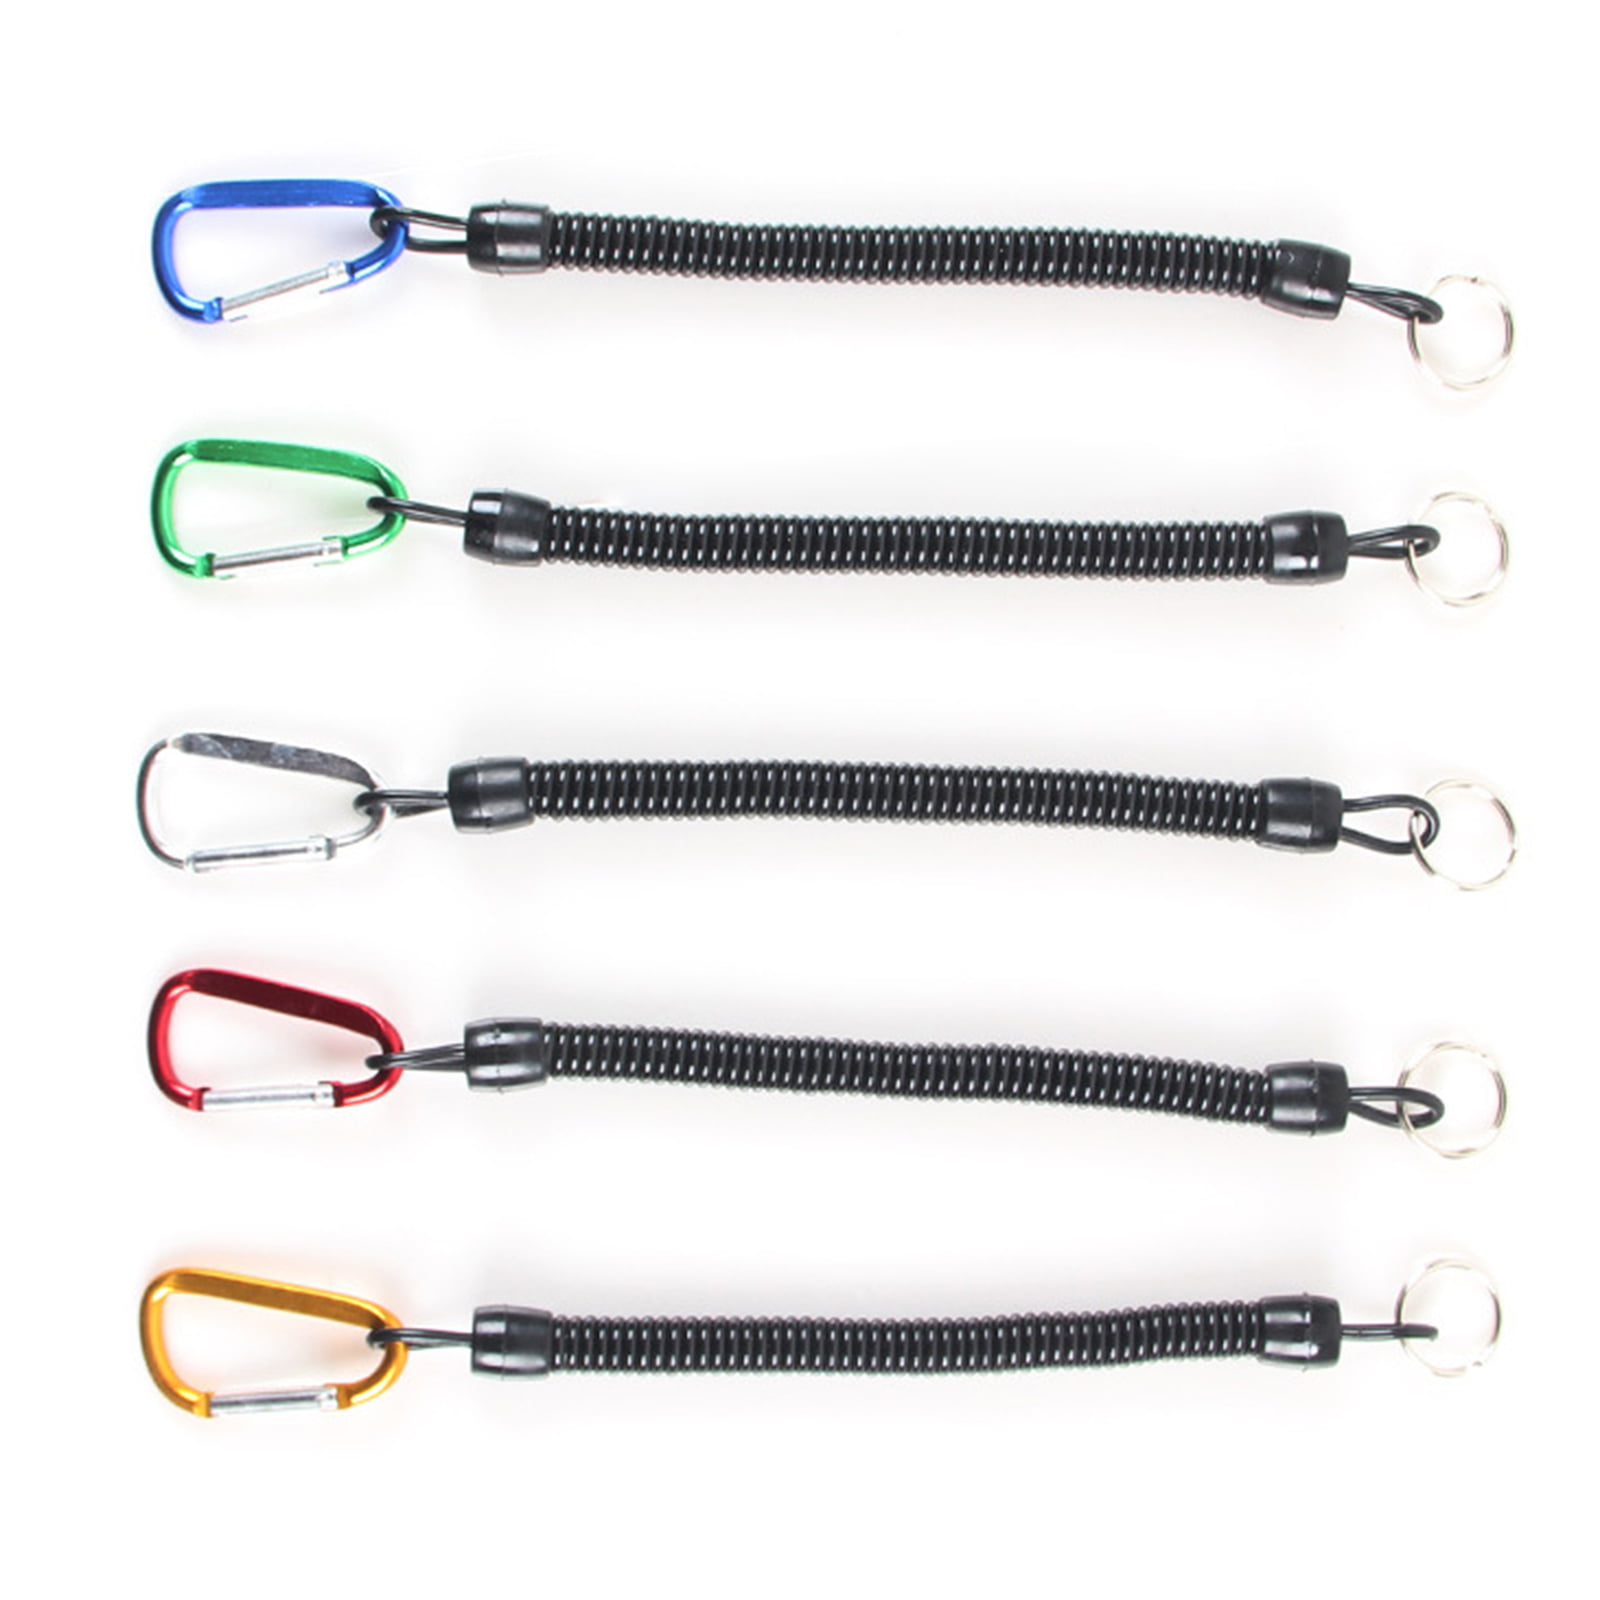 2pcs Spearfishing Parts Scuba Diving Anti-lost Spiral Spring Coil Lanyard Rope 